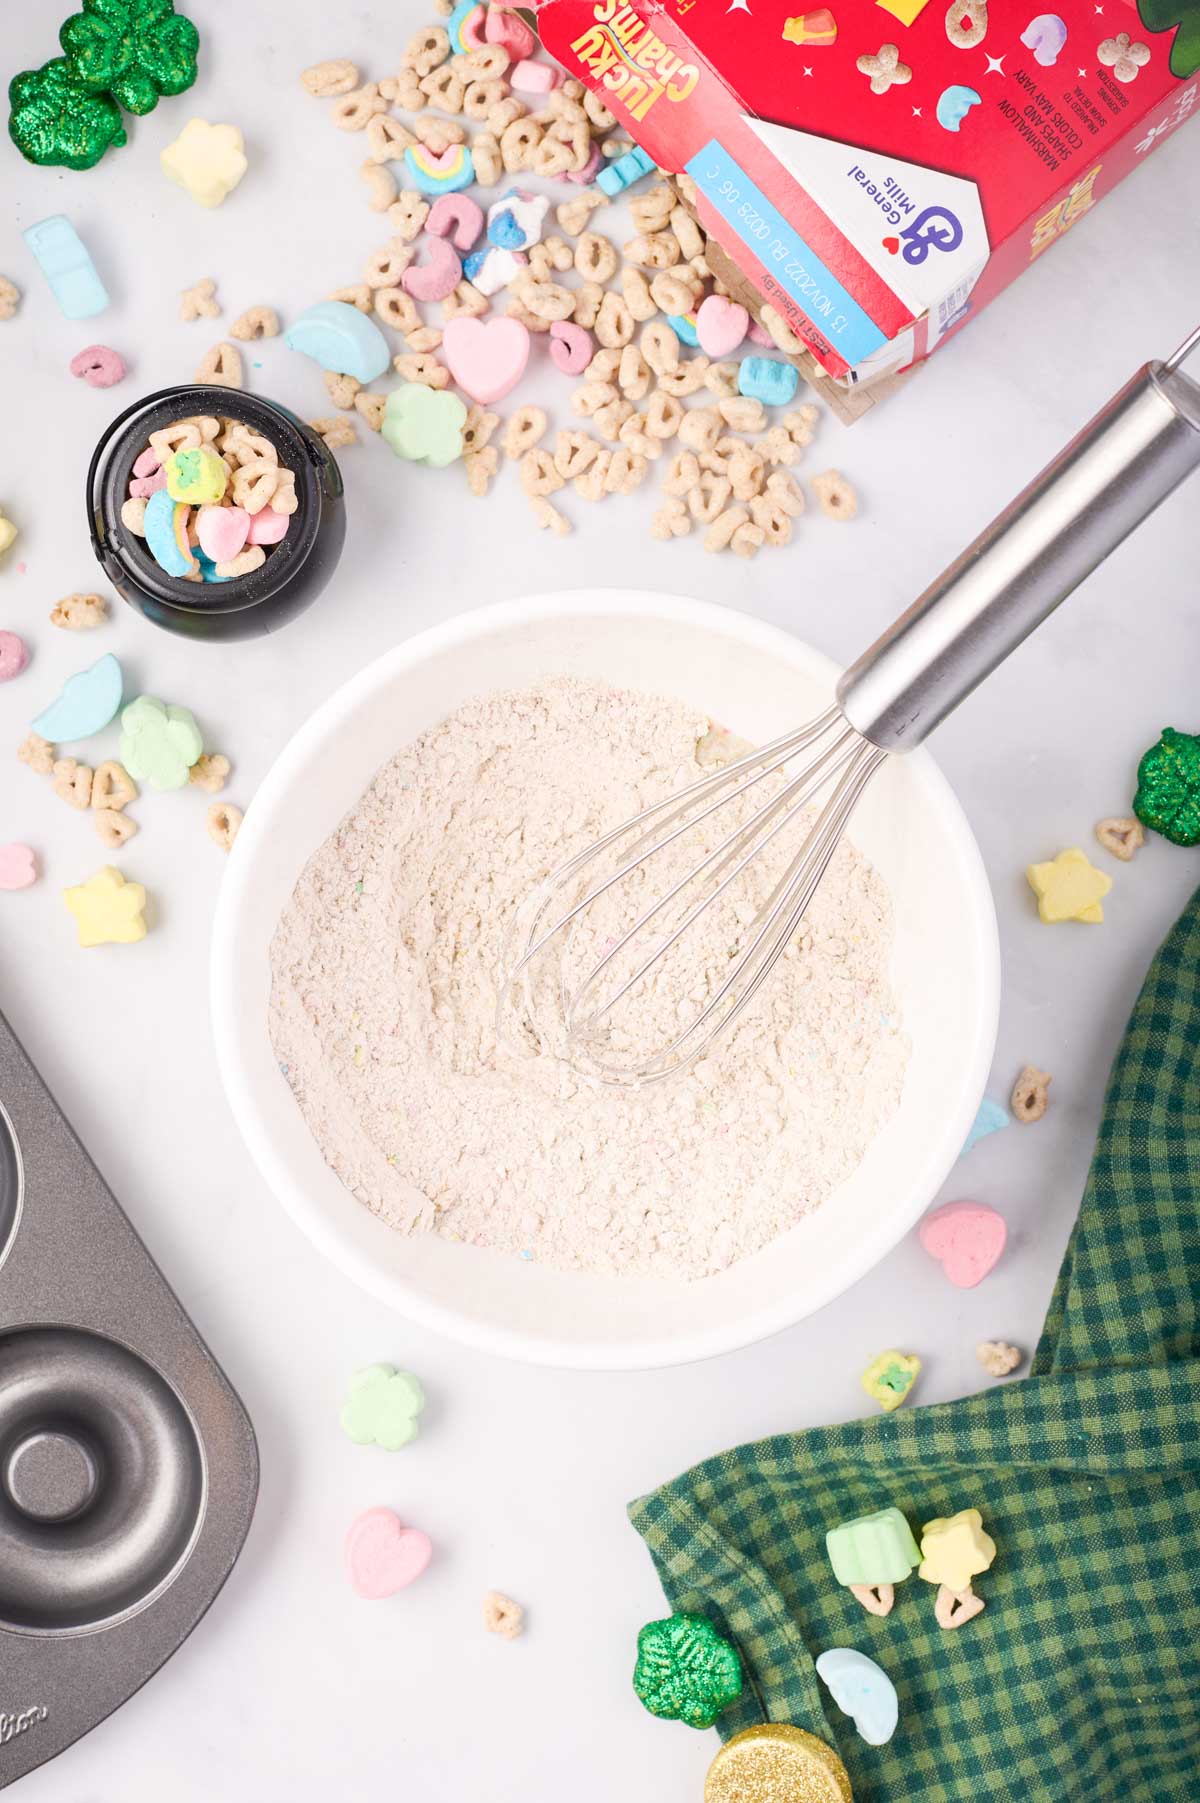 Dry ingredients for lucky charms donuts whisked in a small, white mixing bowl